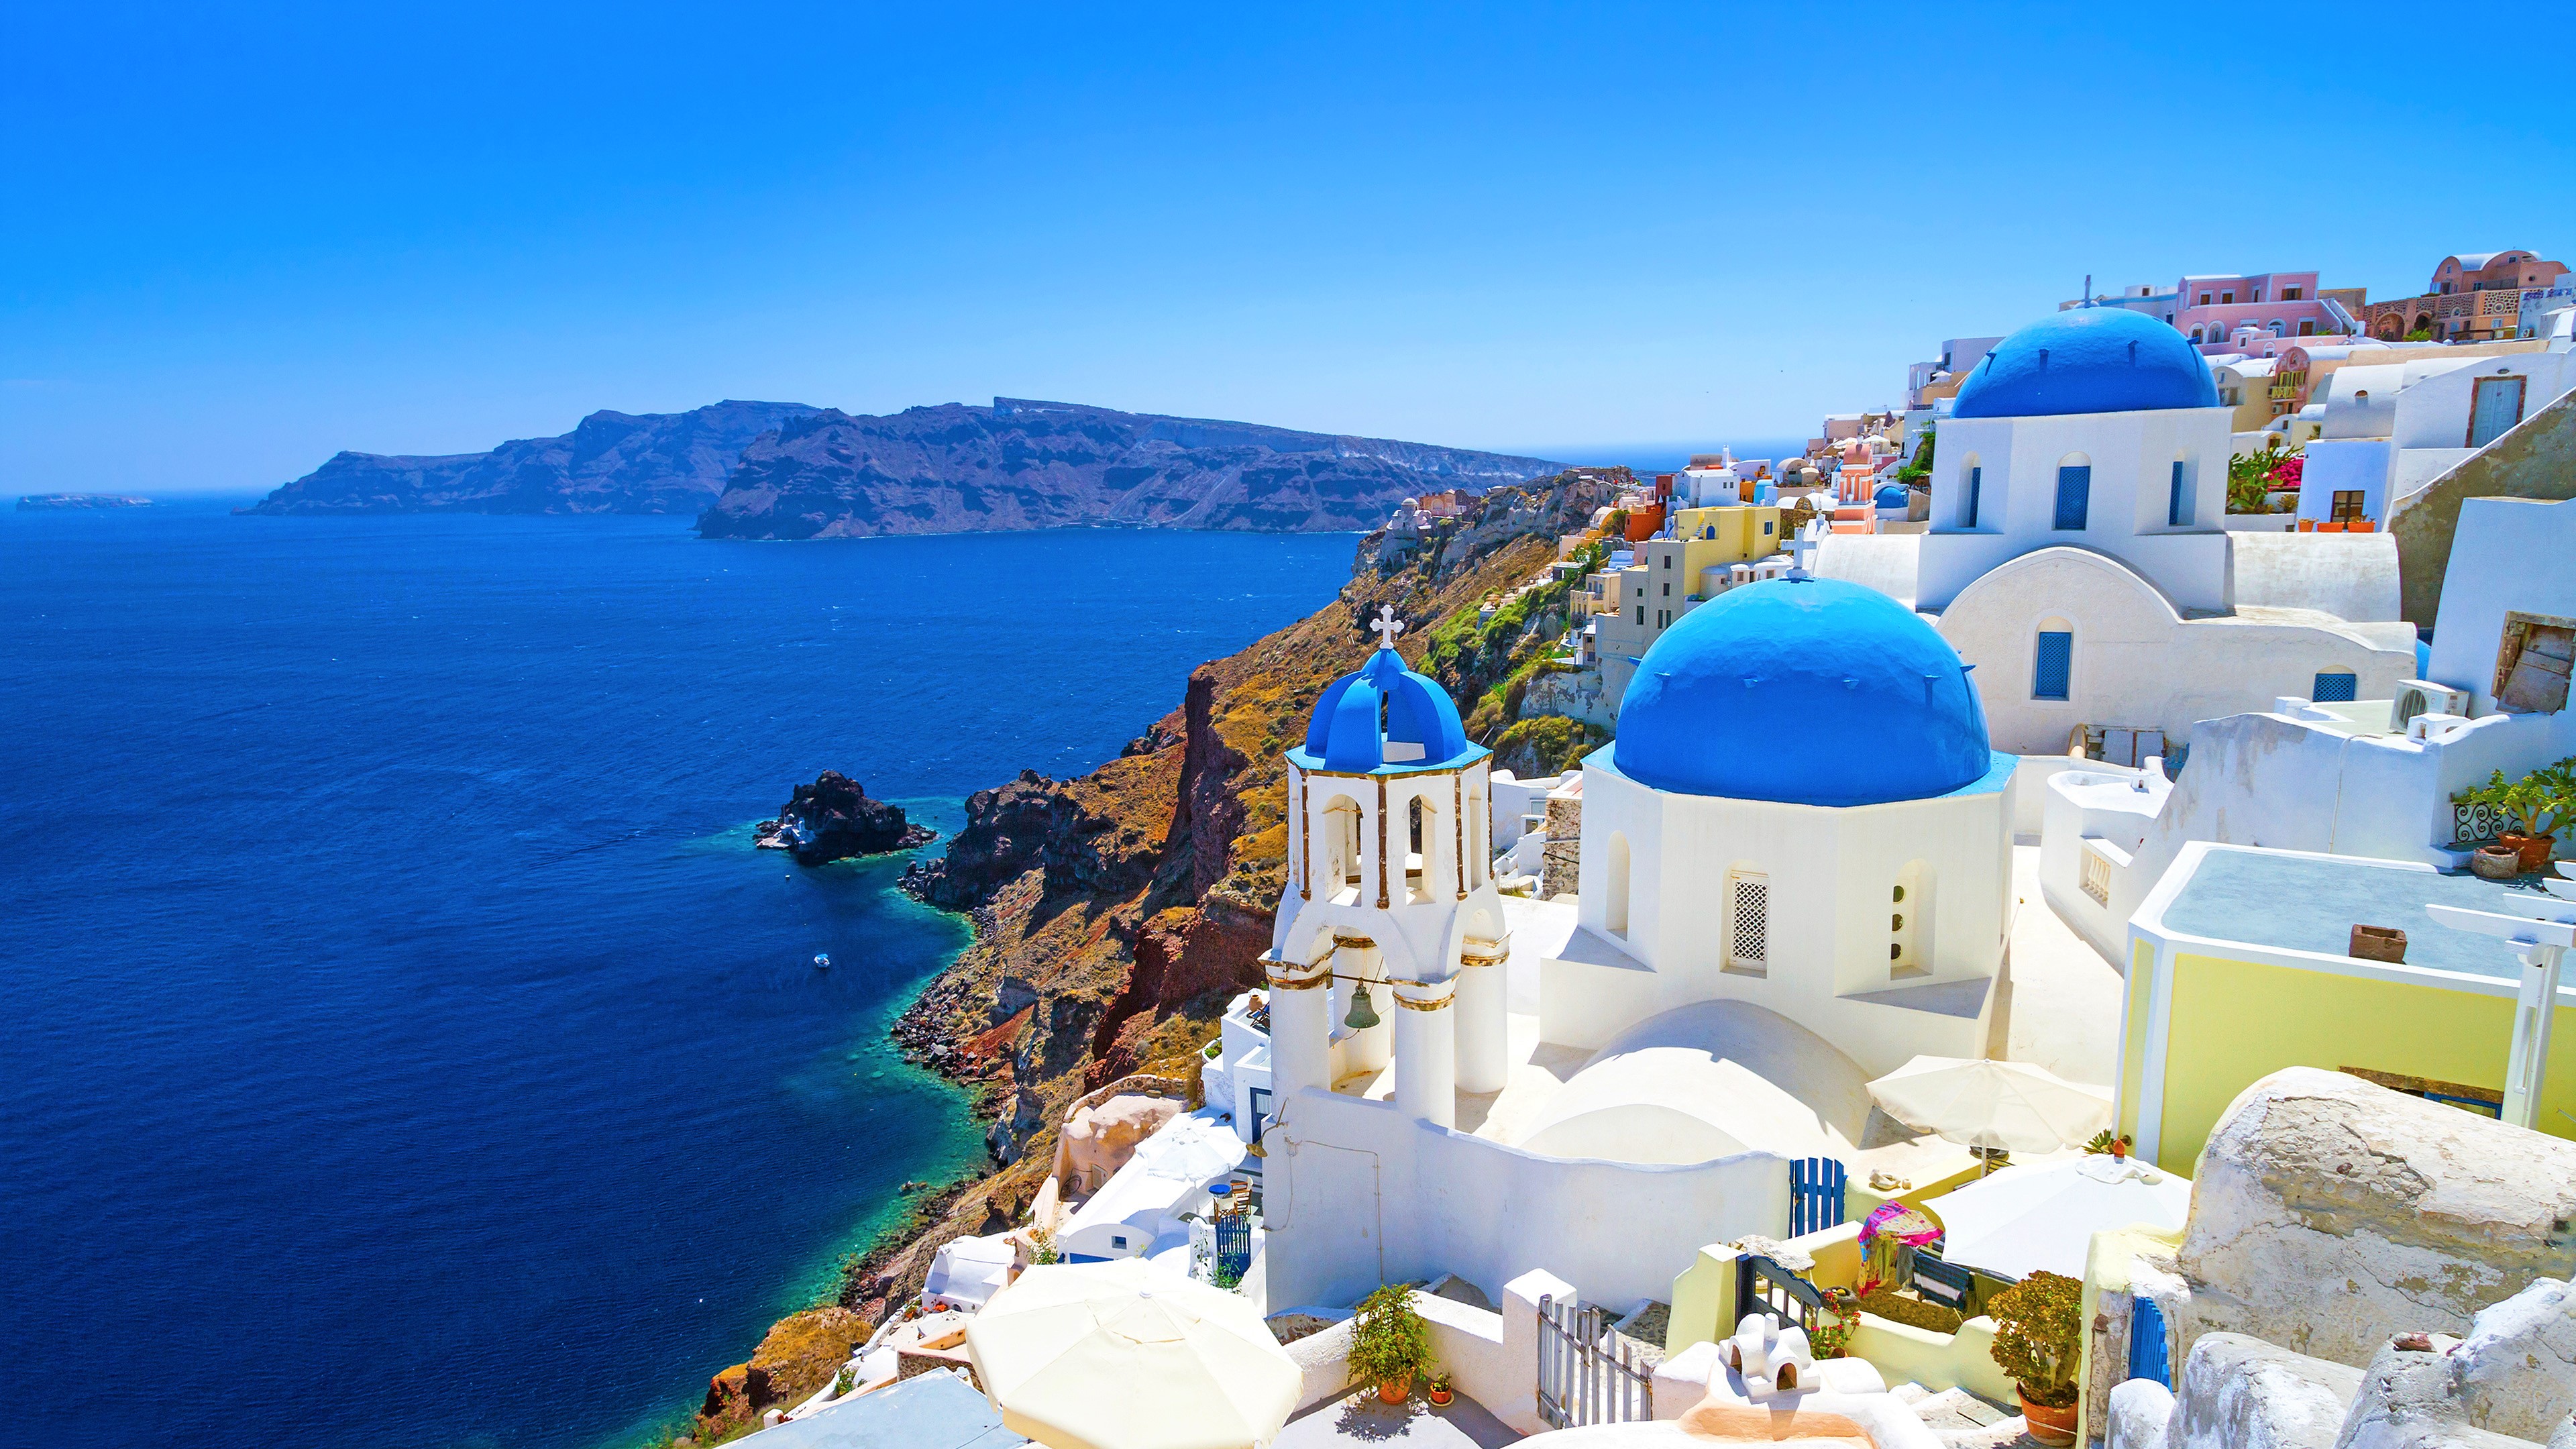 santorini, architecture, man made, greece, house, town, towns